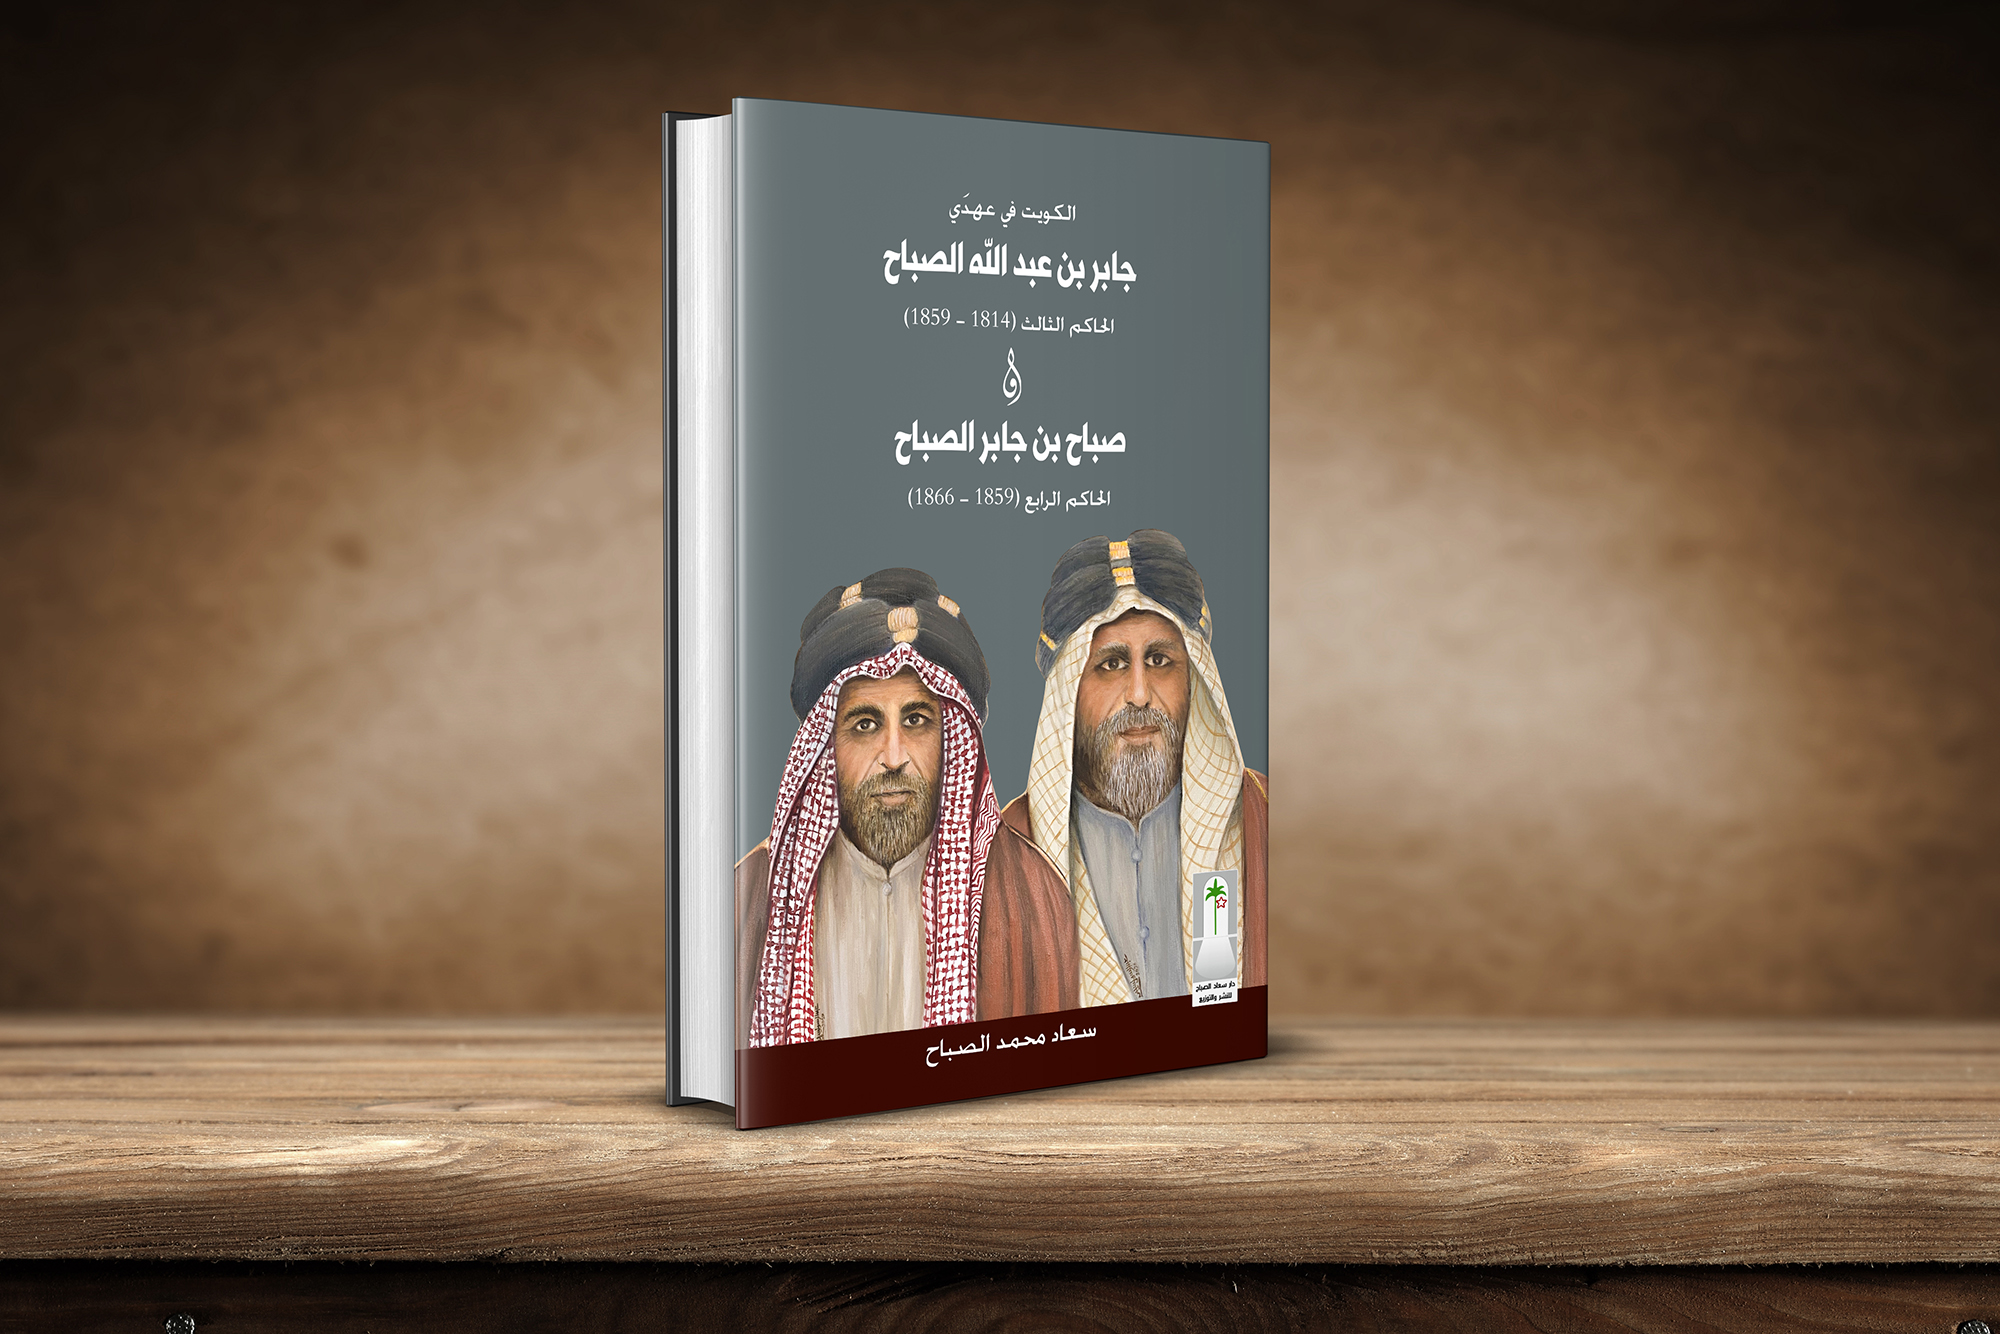 The cover of (Kuwait in the reigns of Jaber bin Abdullah Al-Sabah and Sabah bin Jaber Al-Sabah) book